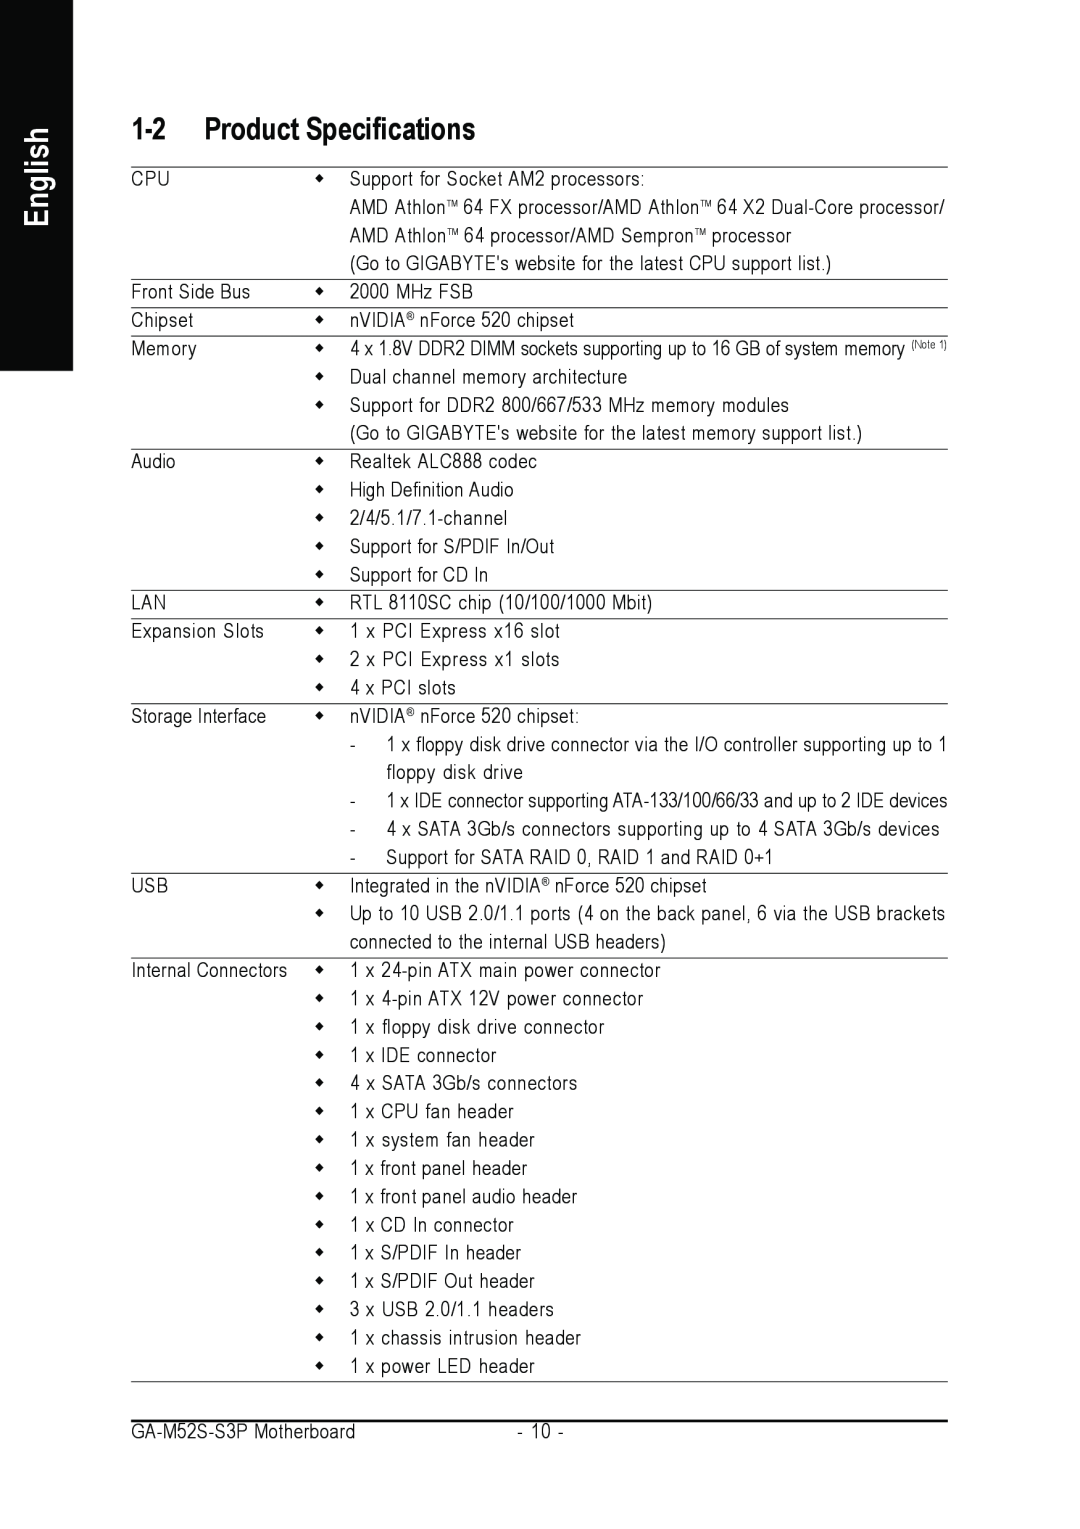 Gigabyte GA-M52S-S3P user manual Product Specifications, English, Storage Interface 